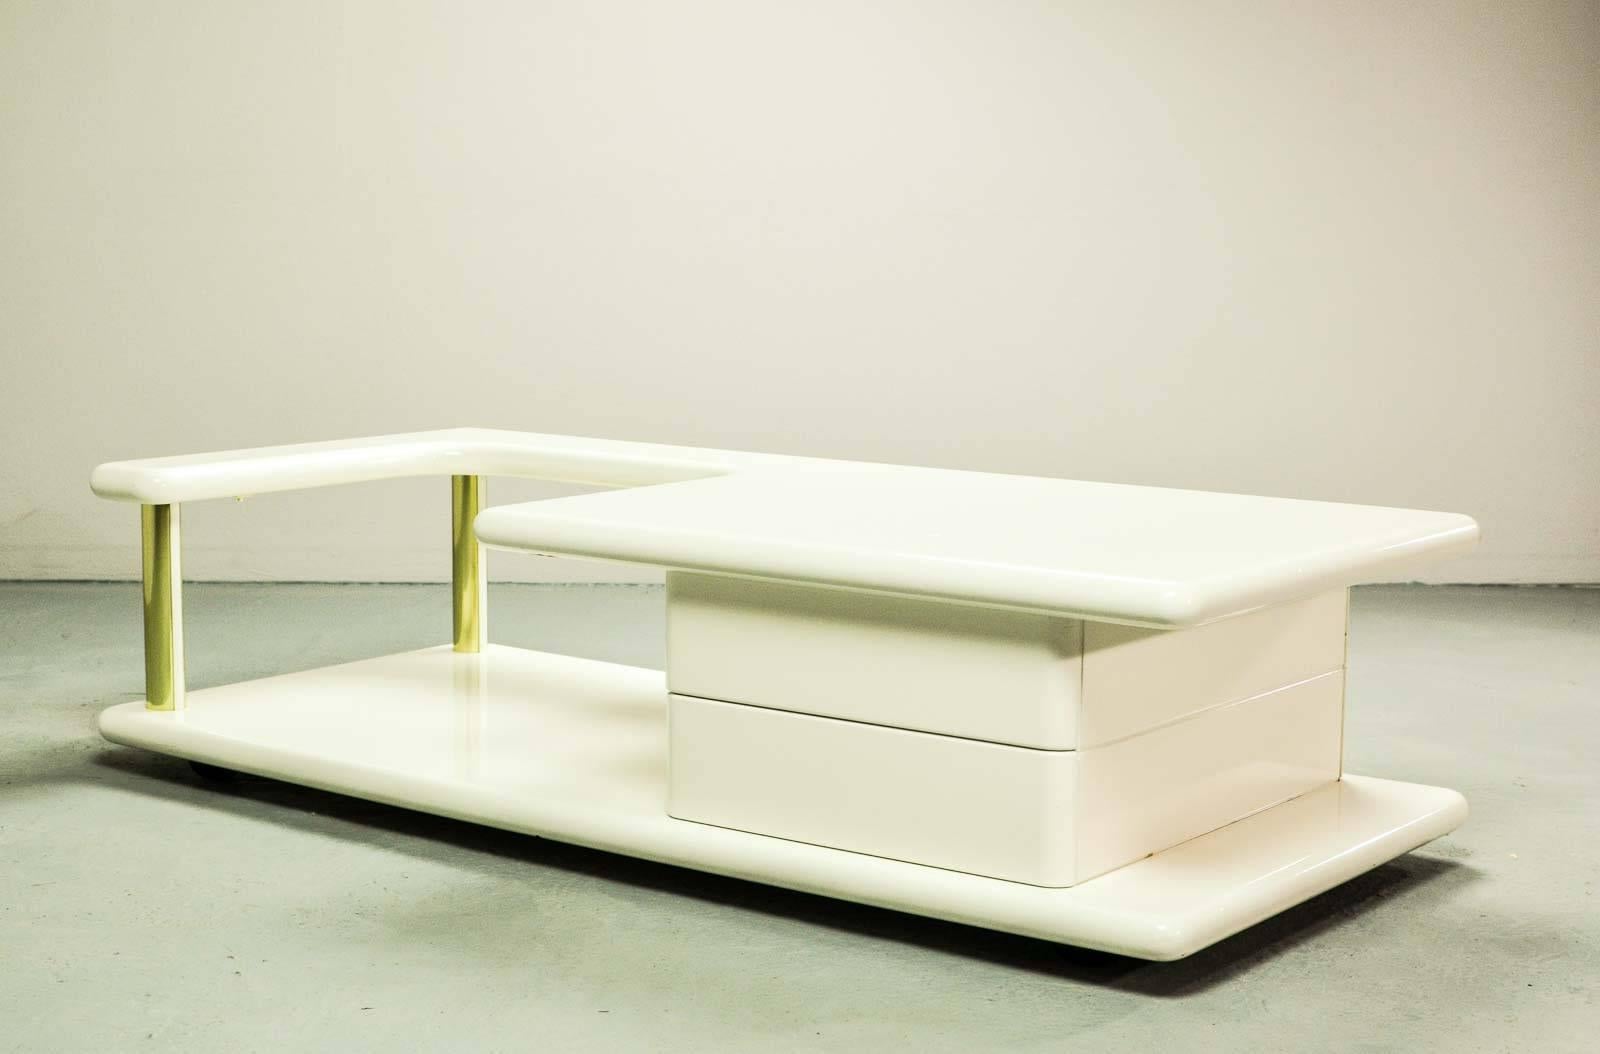 Italian white high gloss lacquered coffee table with brass elements. The table features two hidden drawers which are integrated in the design in a very elegant way. Another striking detail is the free-form shaped tabletop that enables the user to